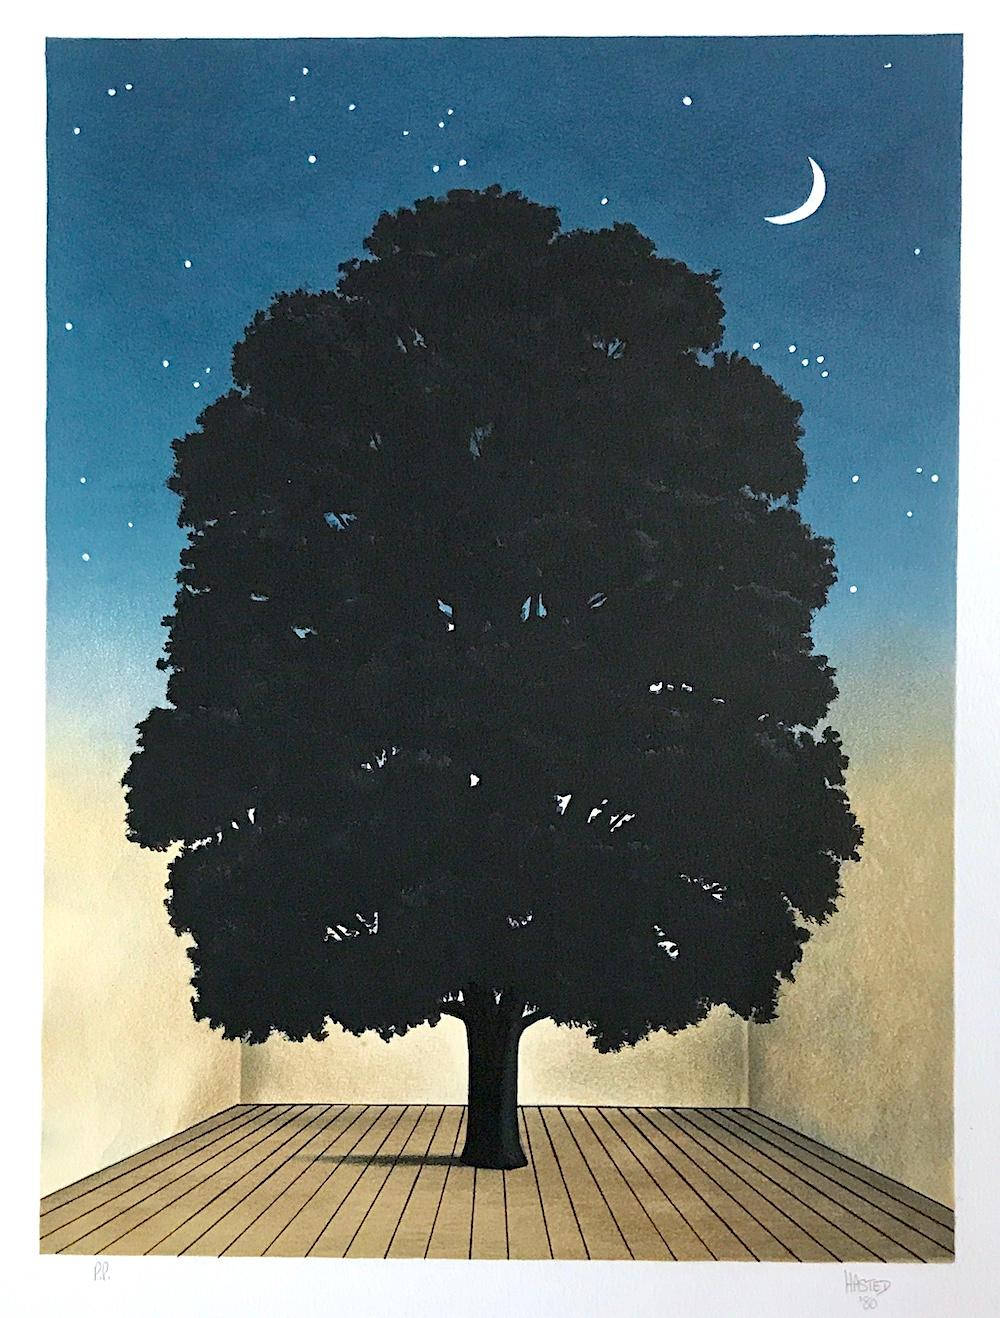 Michael Hasted Interior Print - SONG OF PRAISE Hand Drawn Lithograph, Tree Portrait, Night Sky, Crescent Moon